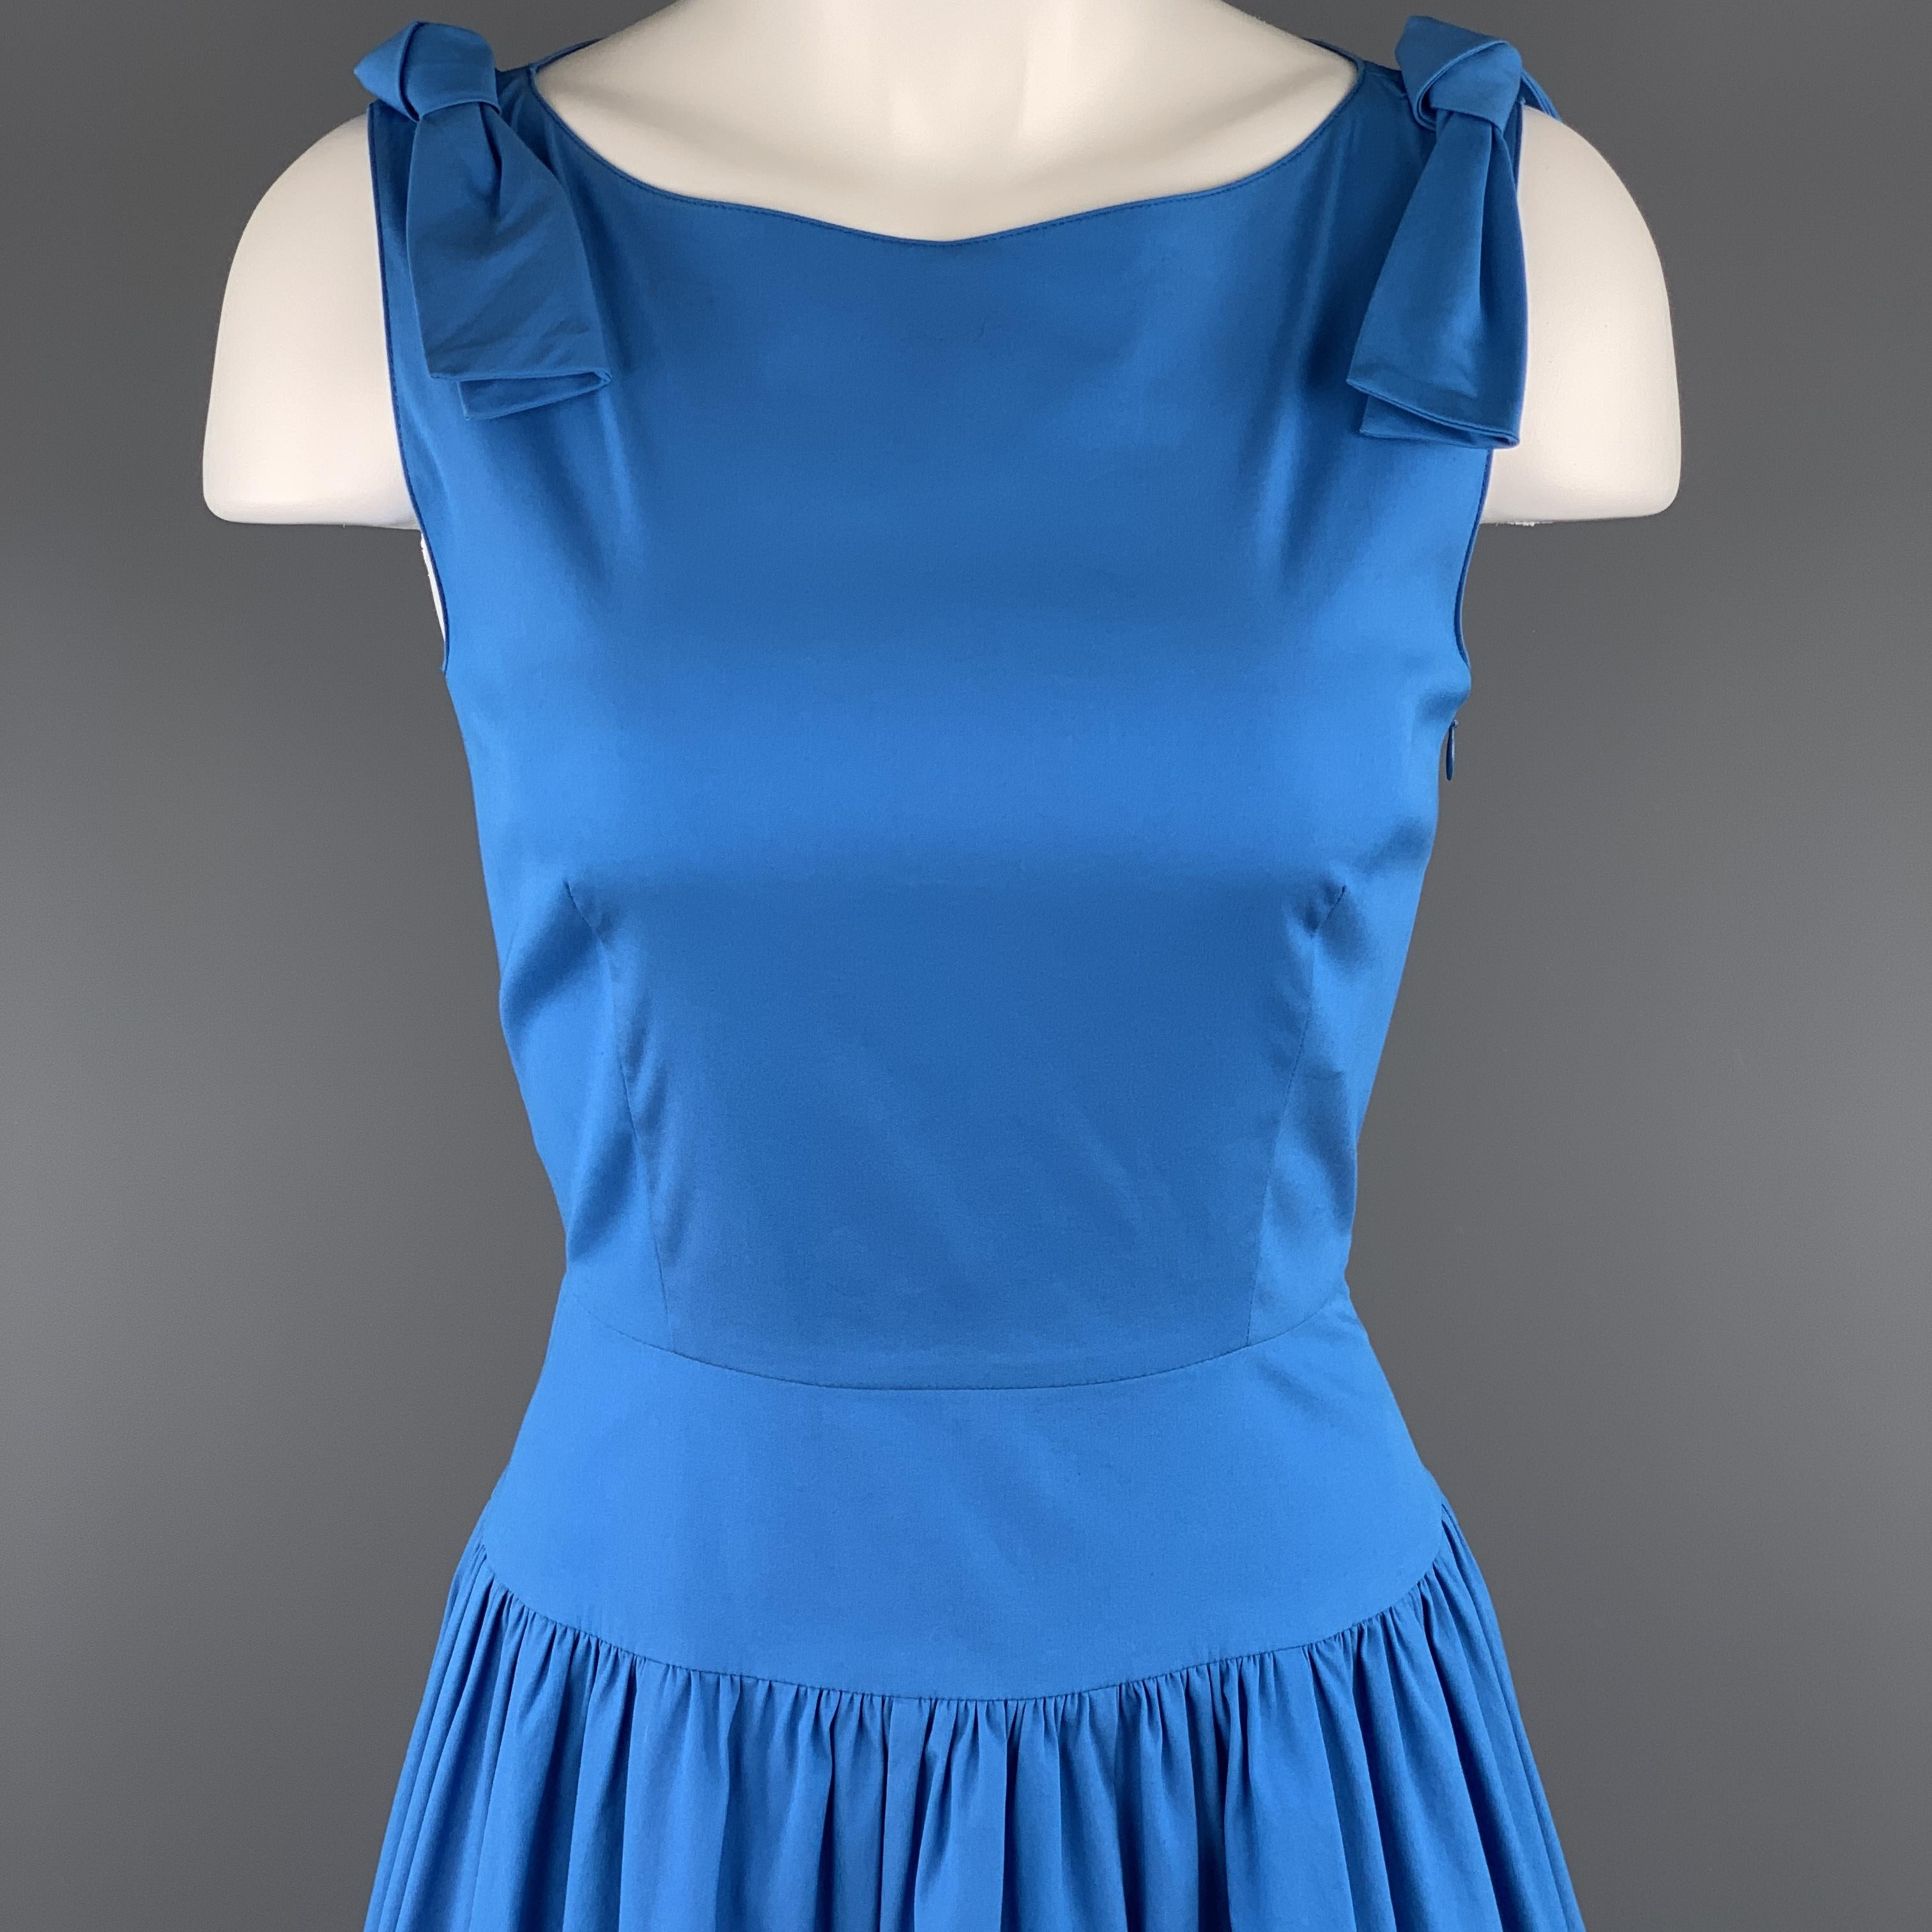 Sleeveless PRADA sun dress comes in blue stretch cotton with a boat neck, bow accents, thick waistband, and gathered full skirt. 

Excellent Pre-Owned Condition.
Marked: IT 38

Measurements:

Shoulder: 14 in.
Bust: 36 in.
Waist: 25 in.
Hip: 44